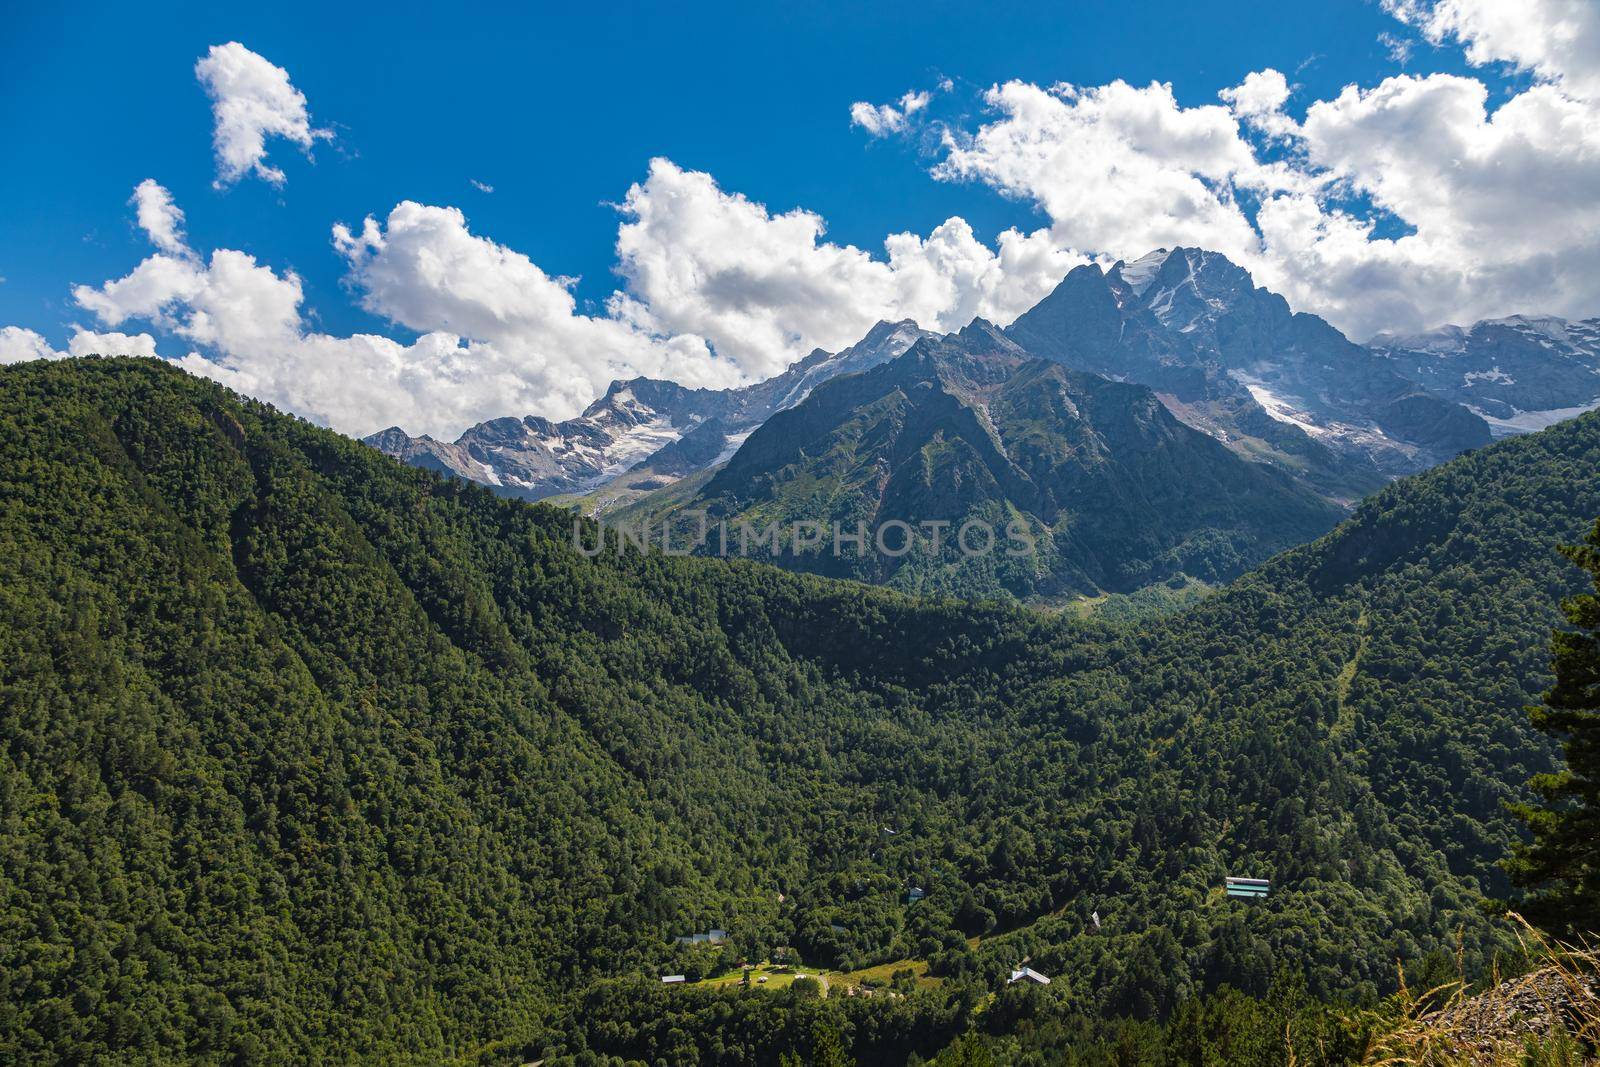 High mountains of the Caucasus with beautiful views. Green vegetation and dense forest above a blue sky. A great fascinating landscape.